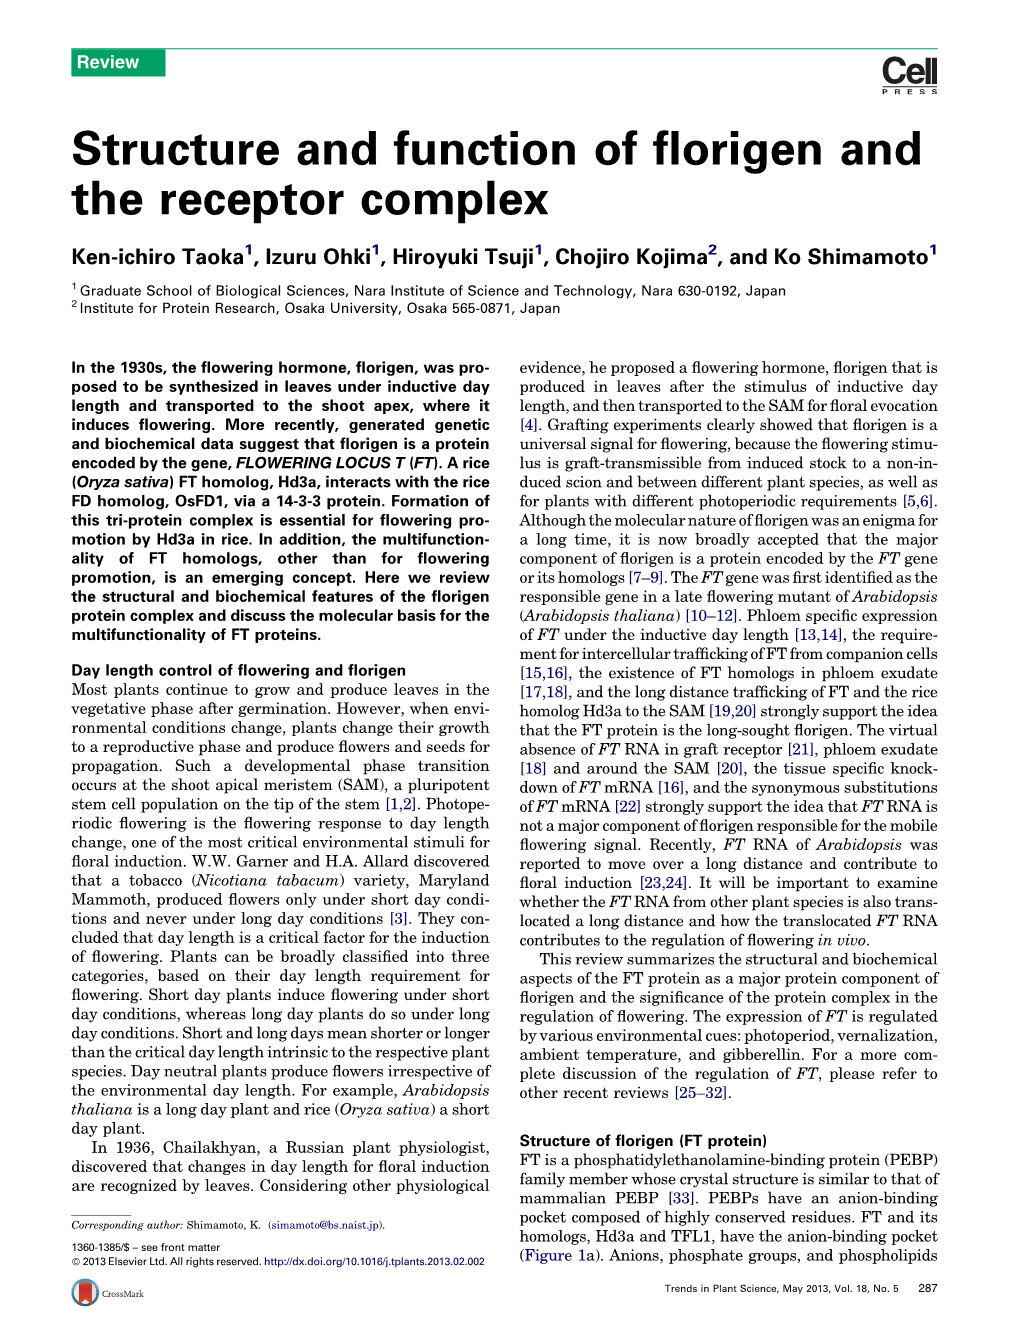 Structure and Function of Florigen and the Receptor Complex